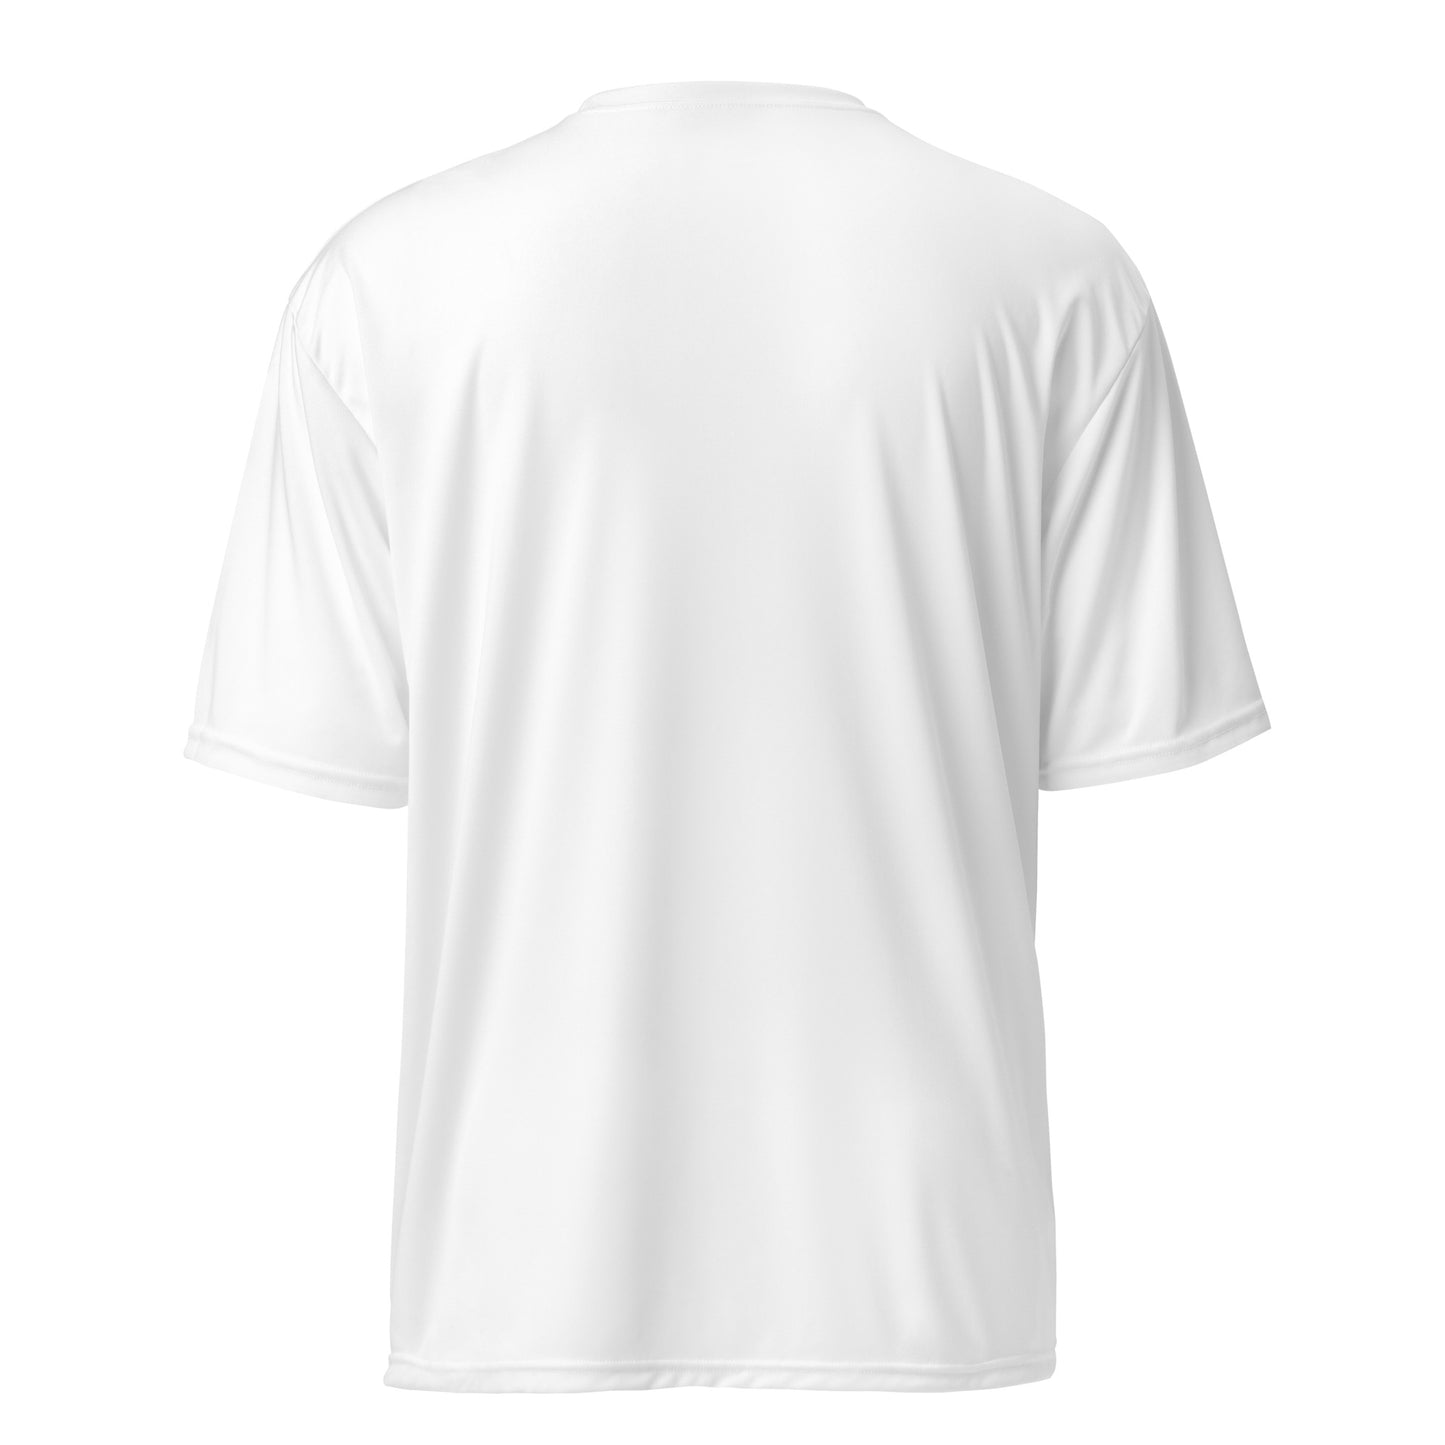 Women's SDV Square up Active T